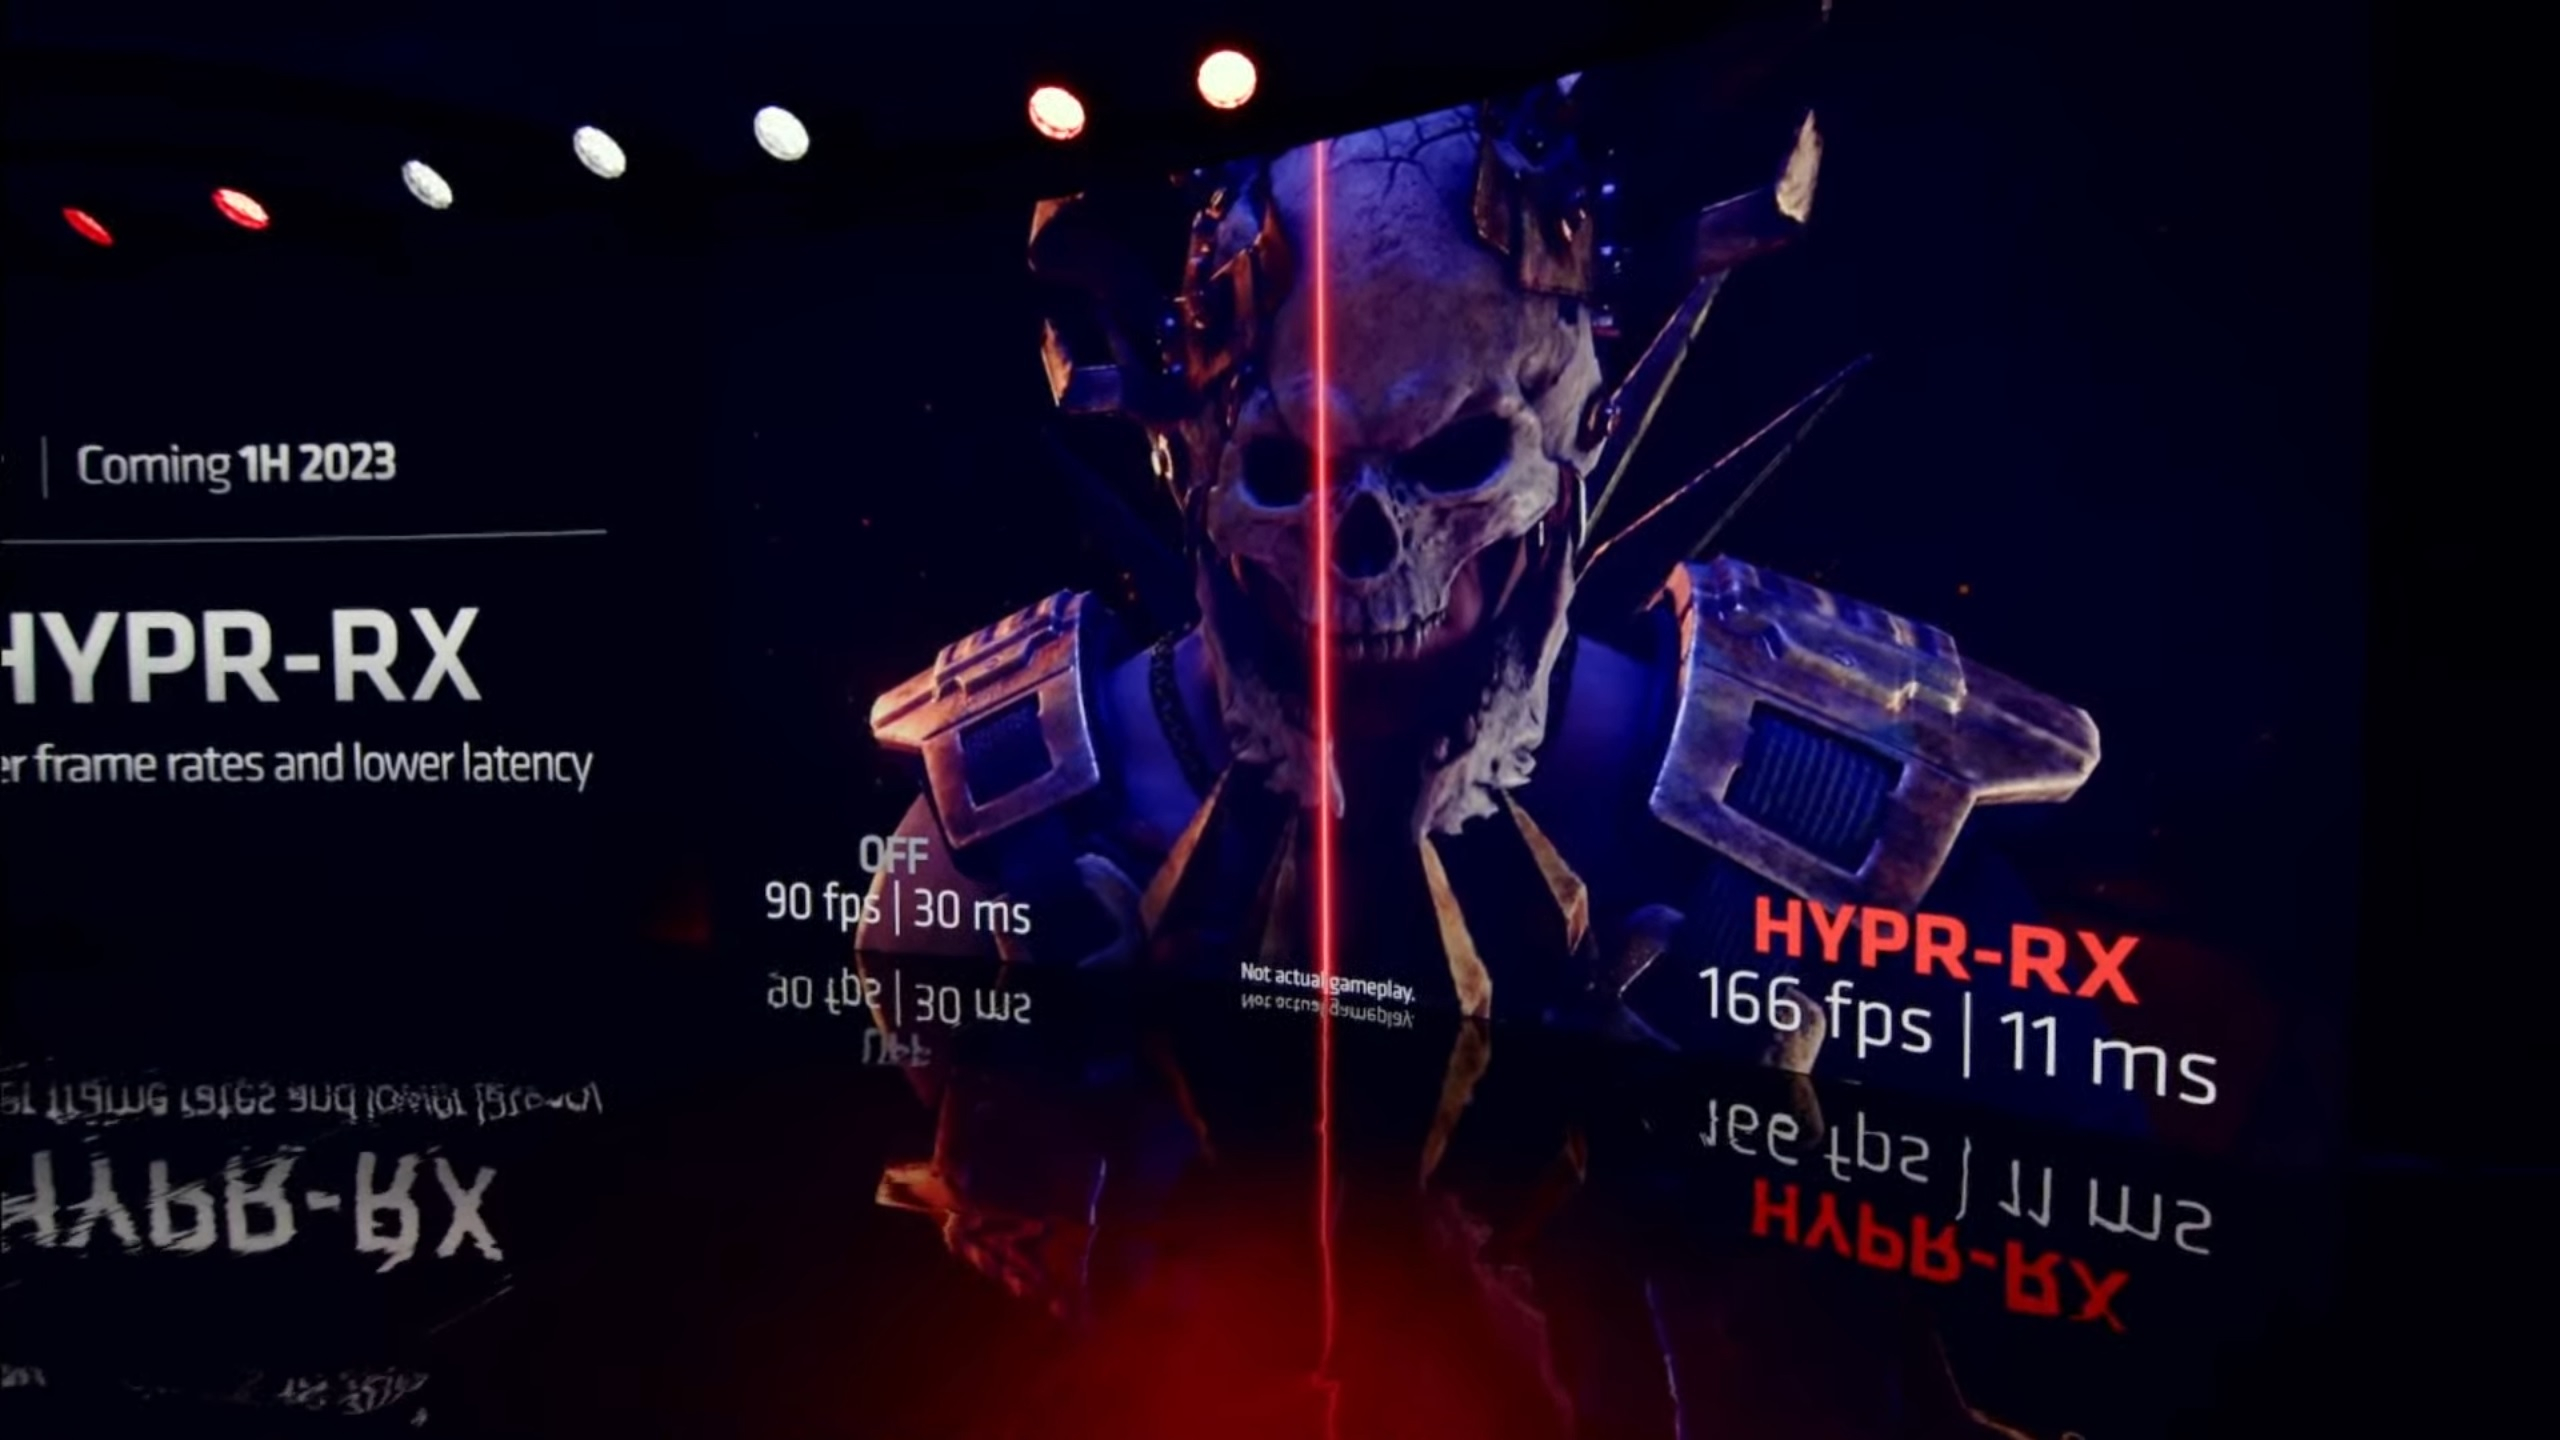 AMD announced FSR 3.0 technology and HYPR-RX feature - both will boost FPS, but will not appear until 2023